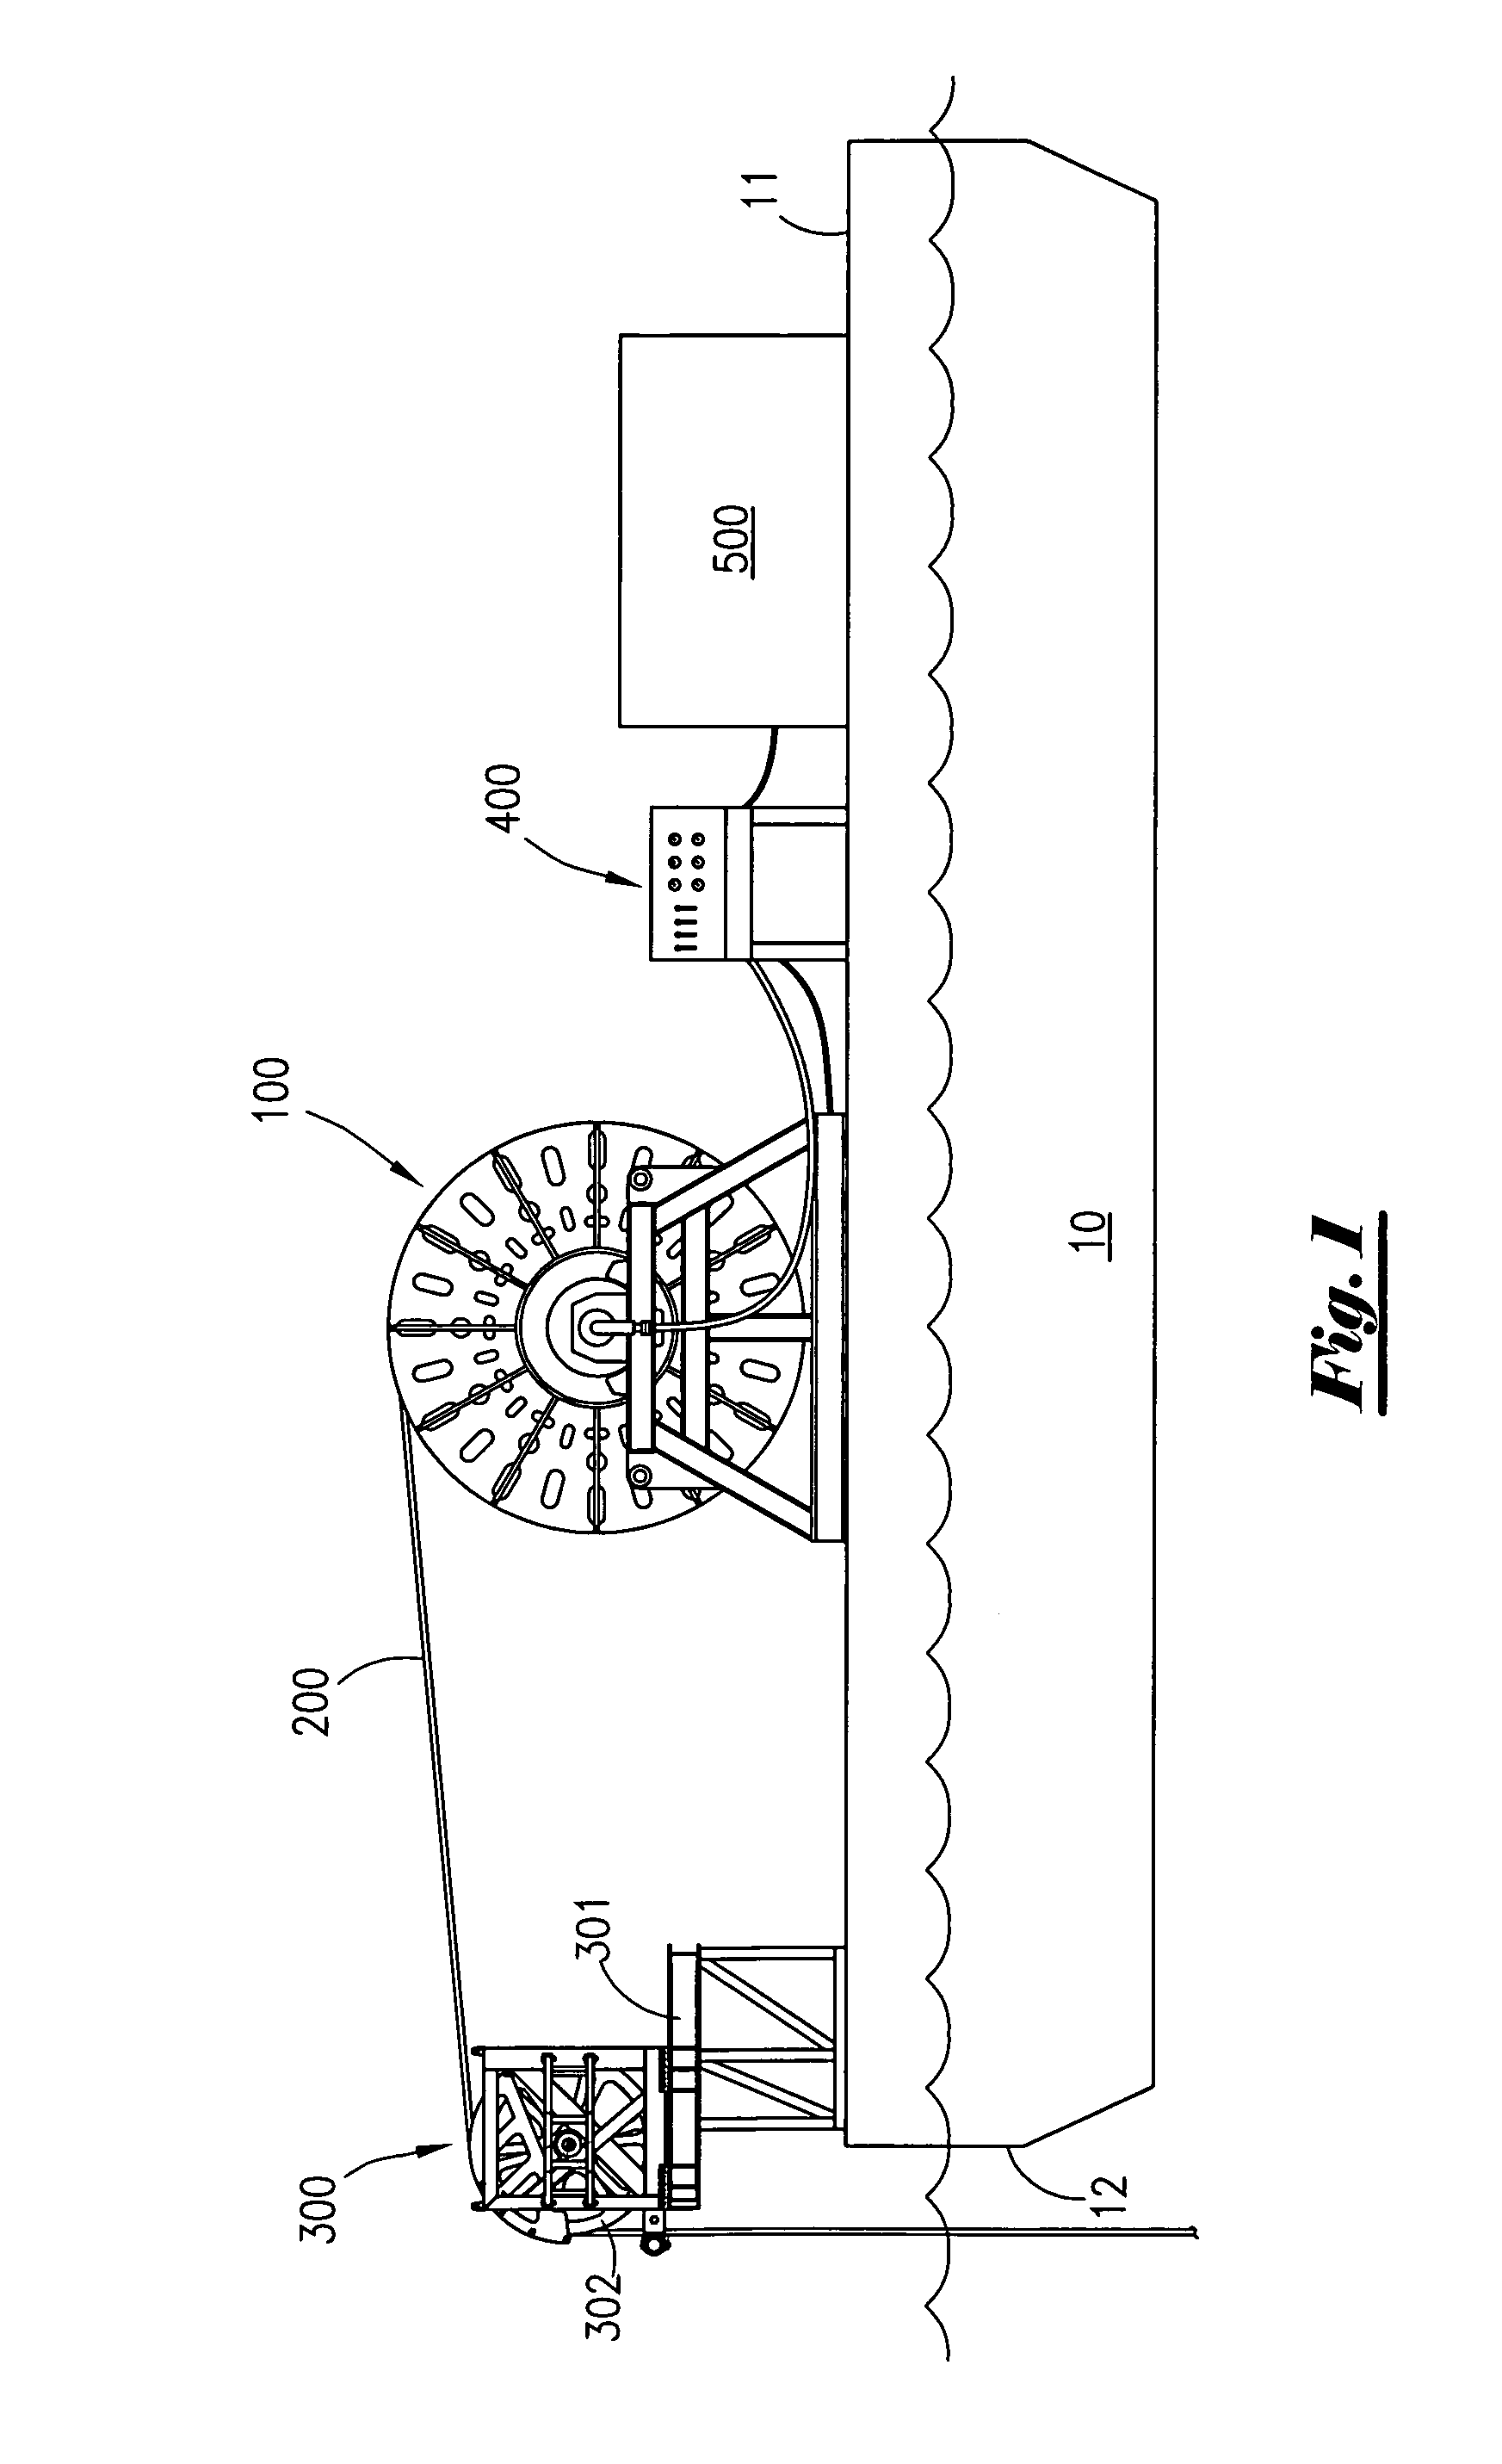 Method and apparatus for performing continuous tubing operations